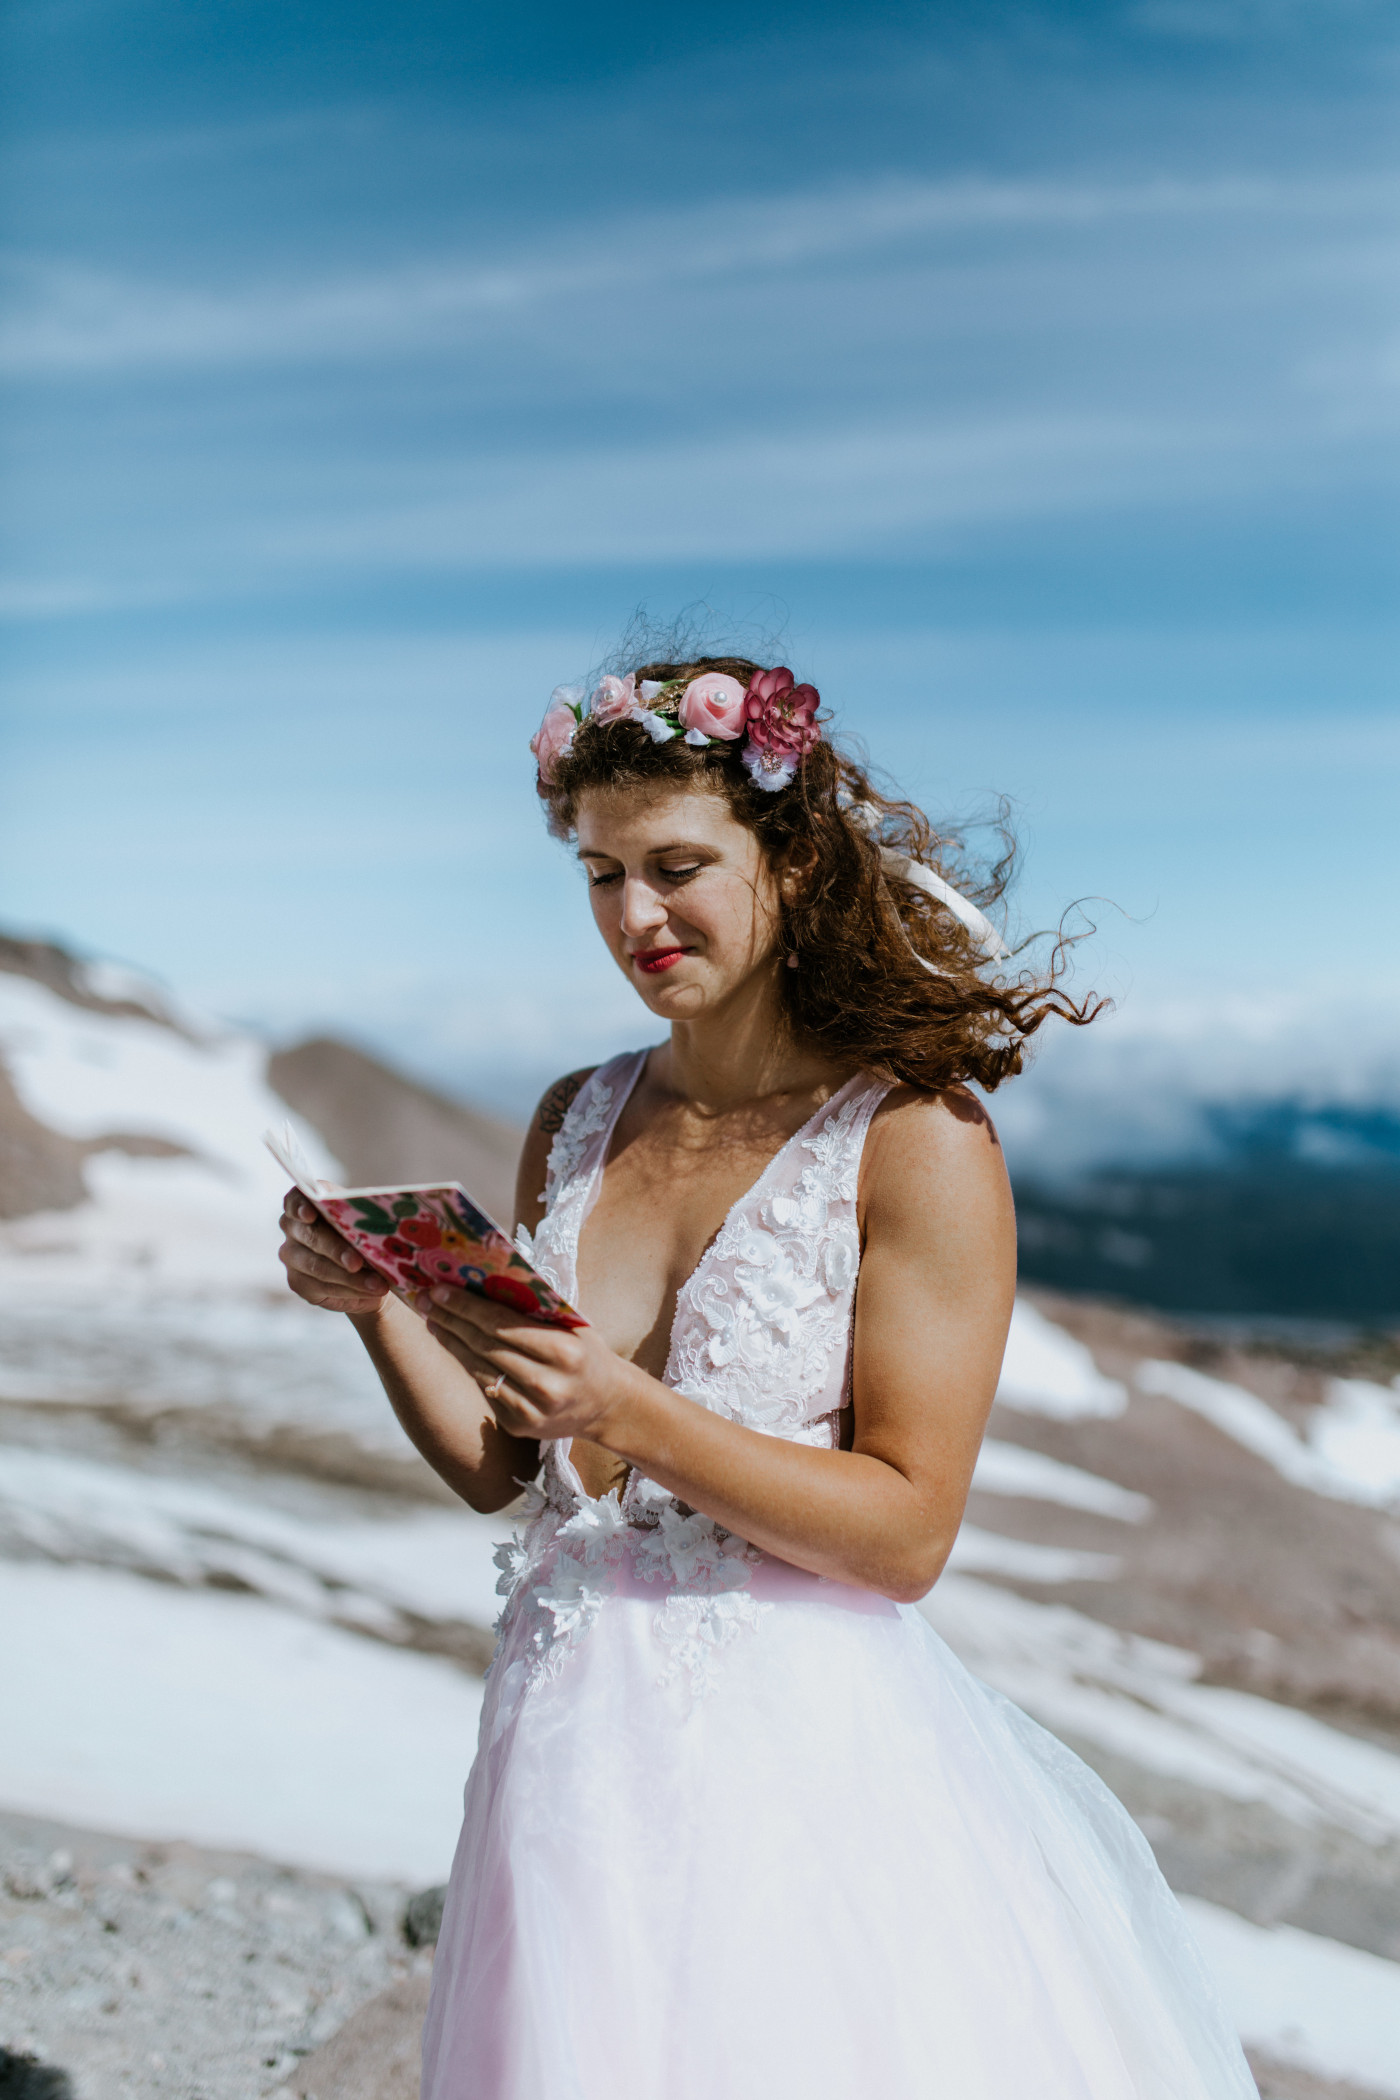 Heather reads from her vow book. Elopement photography at Mount Hood by Sienna Plus Josh.